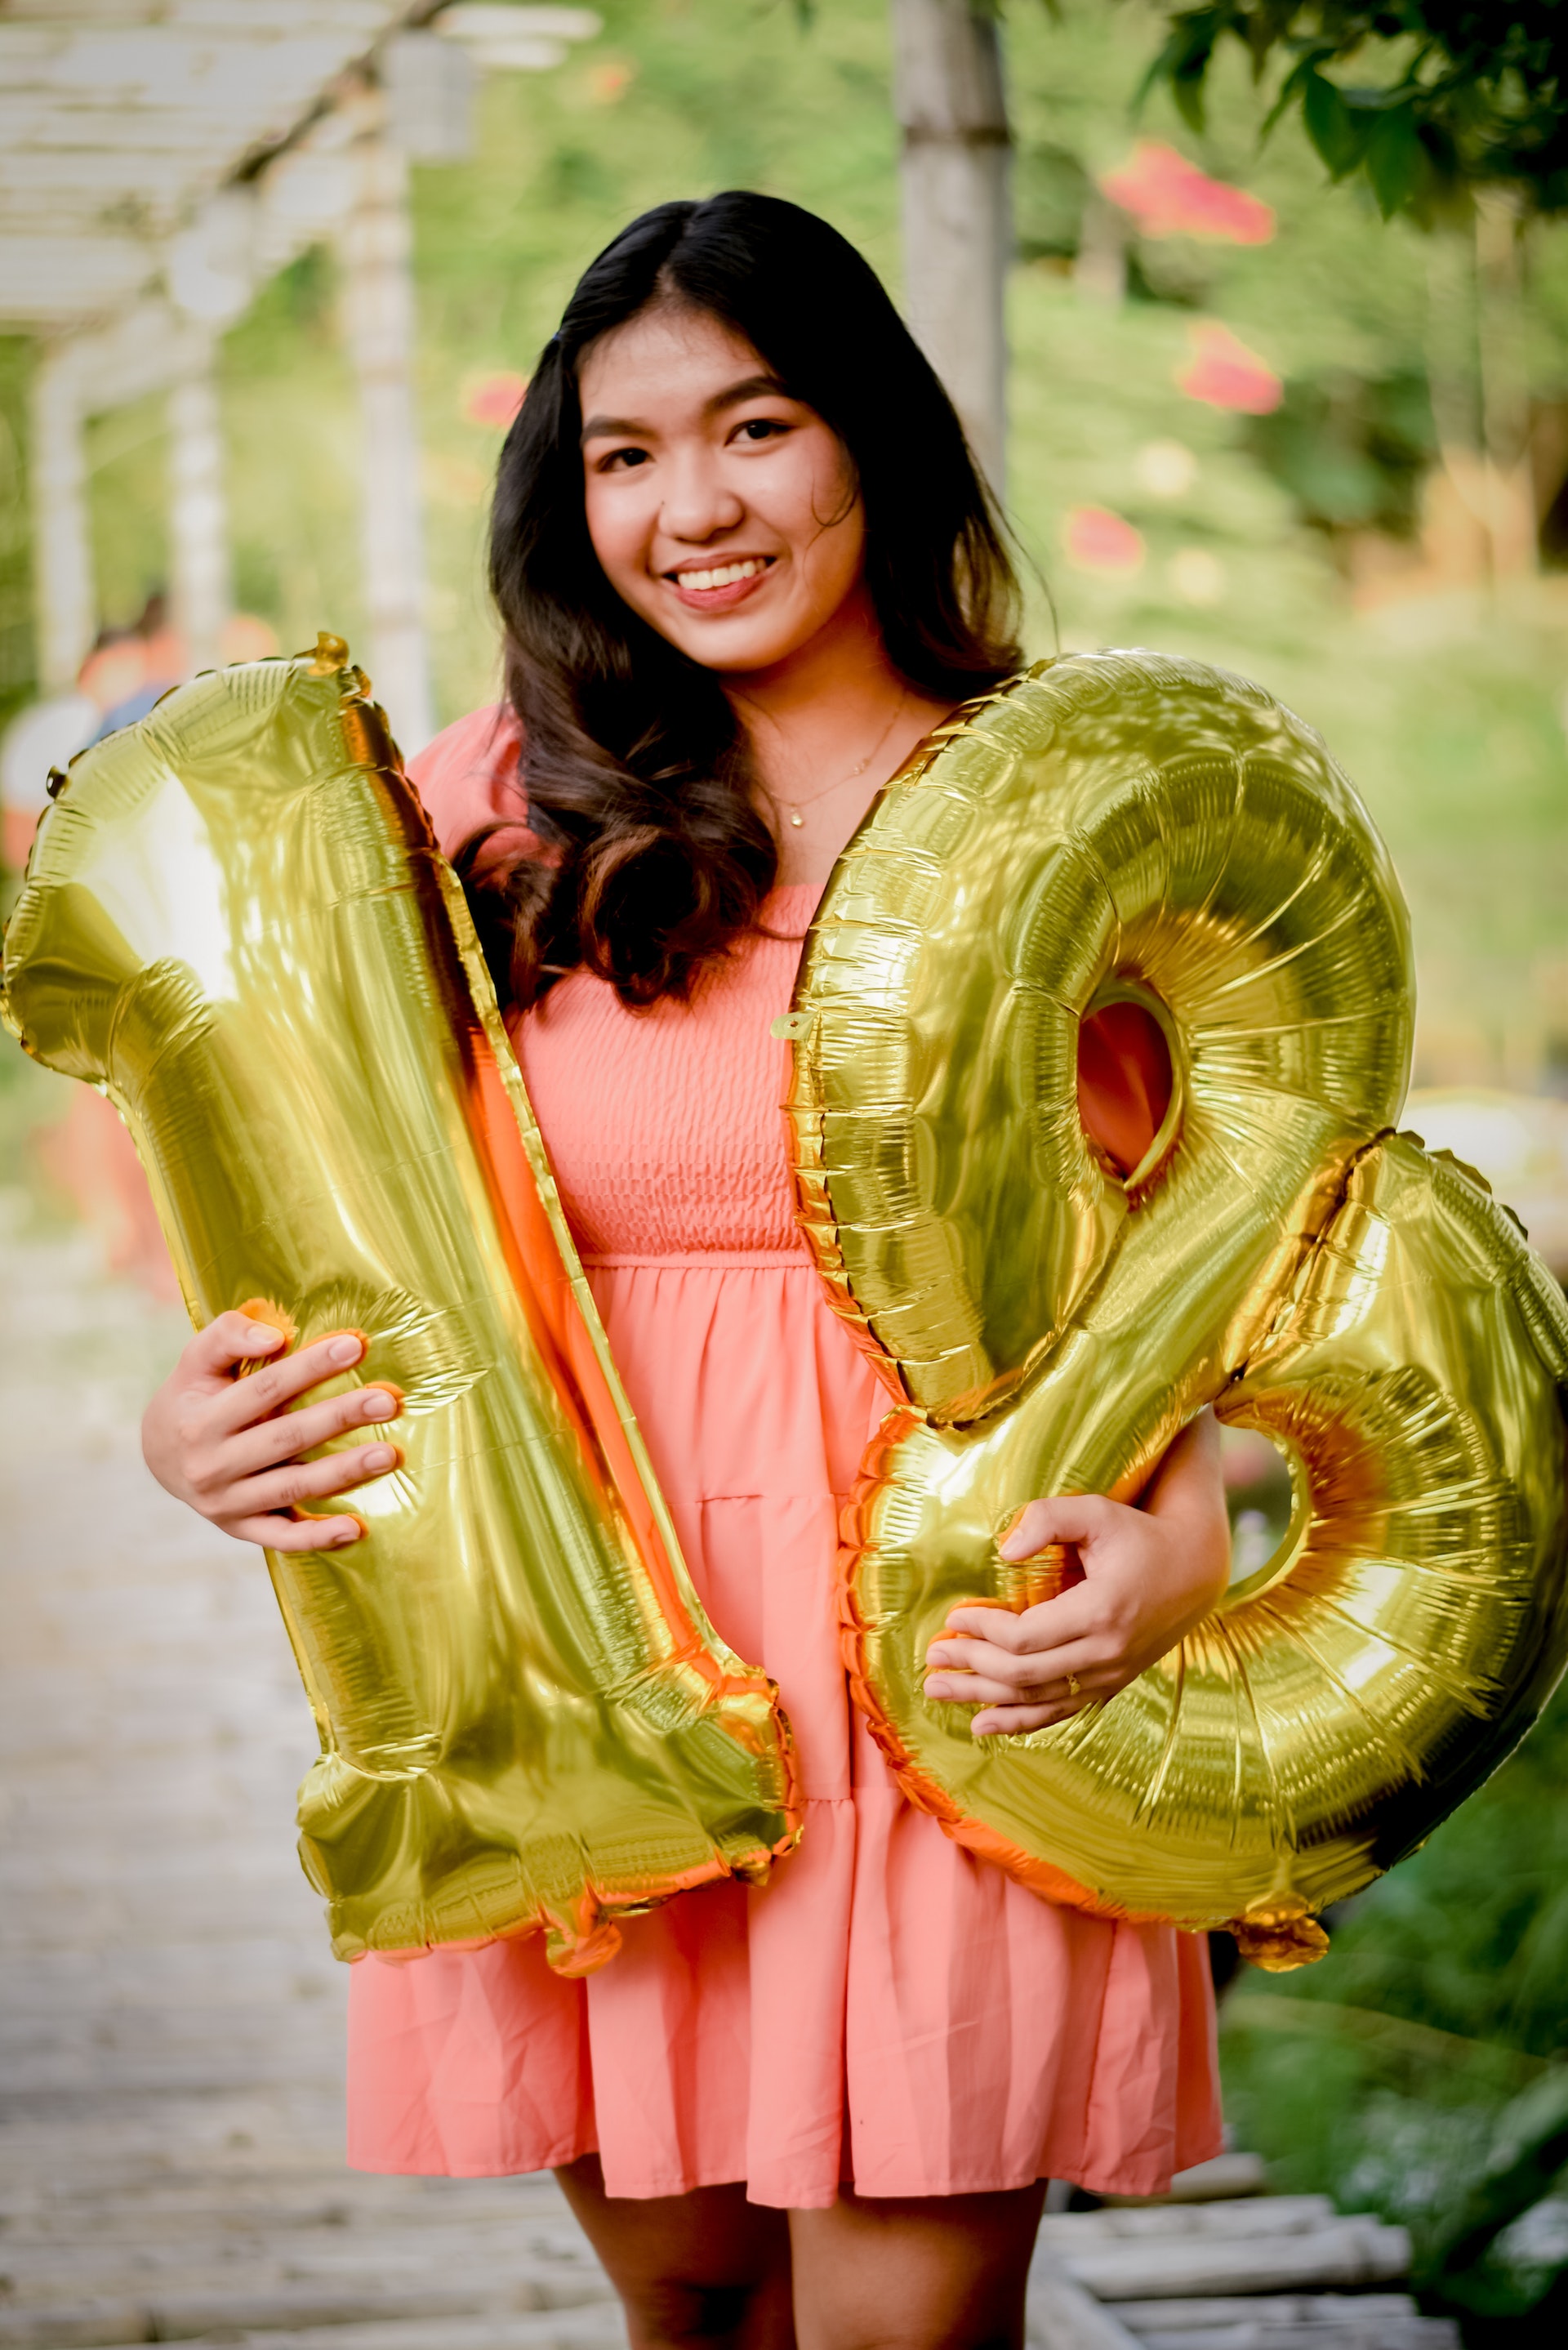 A young girl poses with balloons on her 18th birthday | Source: Pexels